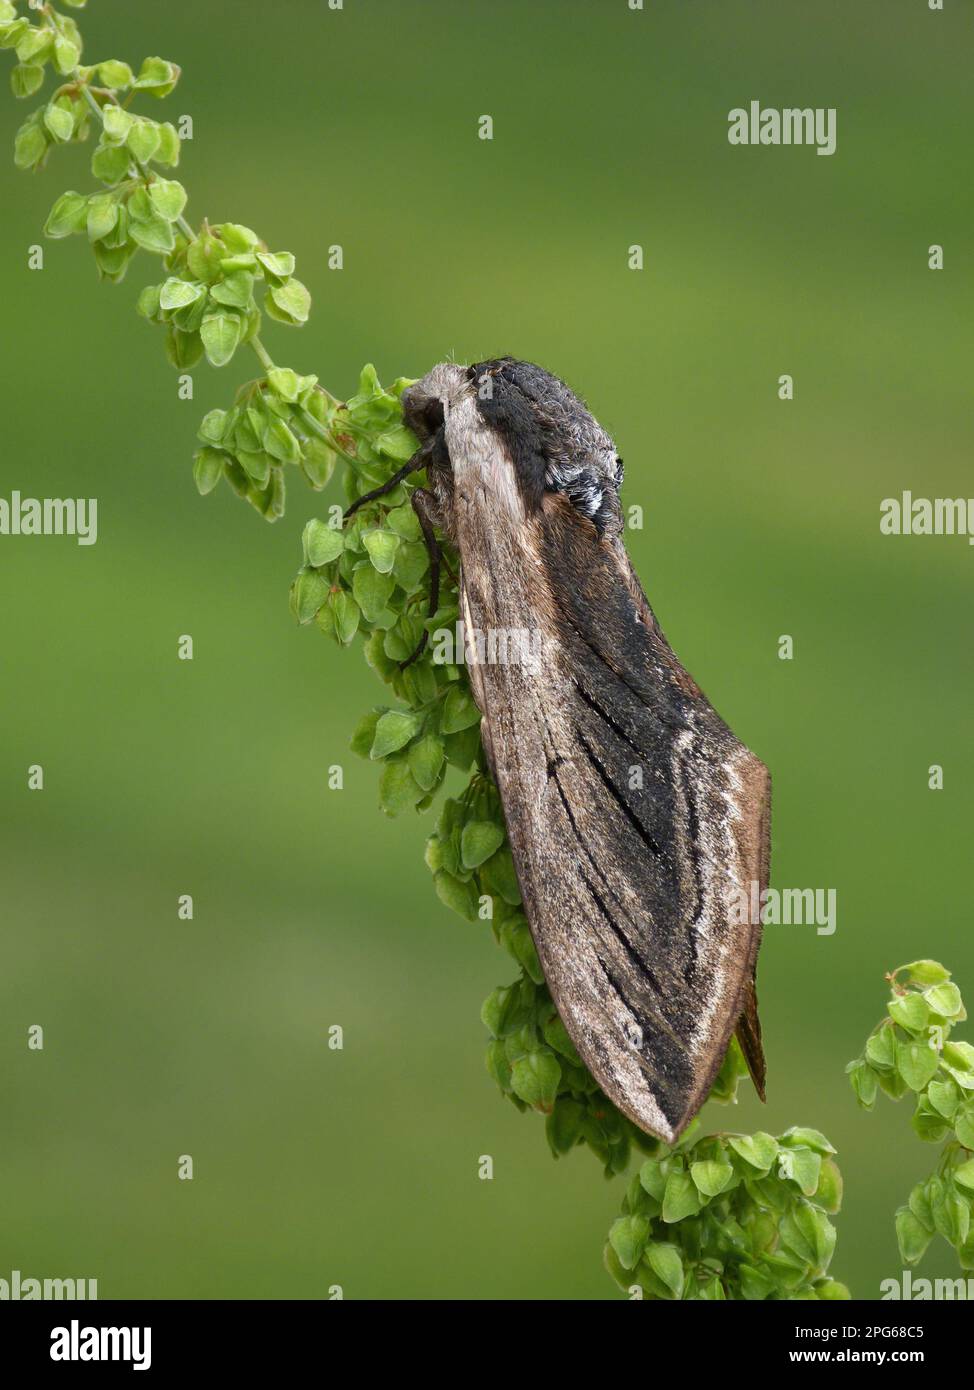 Privet hawkmoth (Sphinx ligustri), Hawkmoth, Insects, Moths, Butterflies, Animals, Other animals, Privet Hawkmoth adult male, roosting on sorrel stem Stock Photo